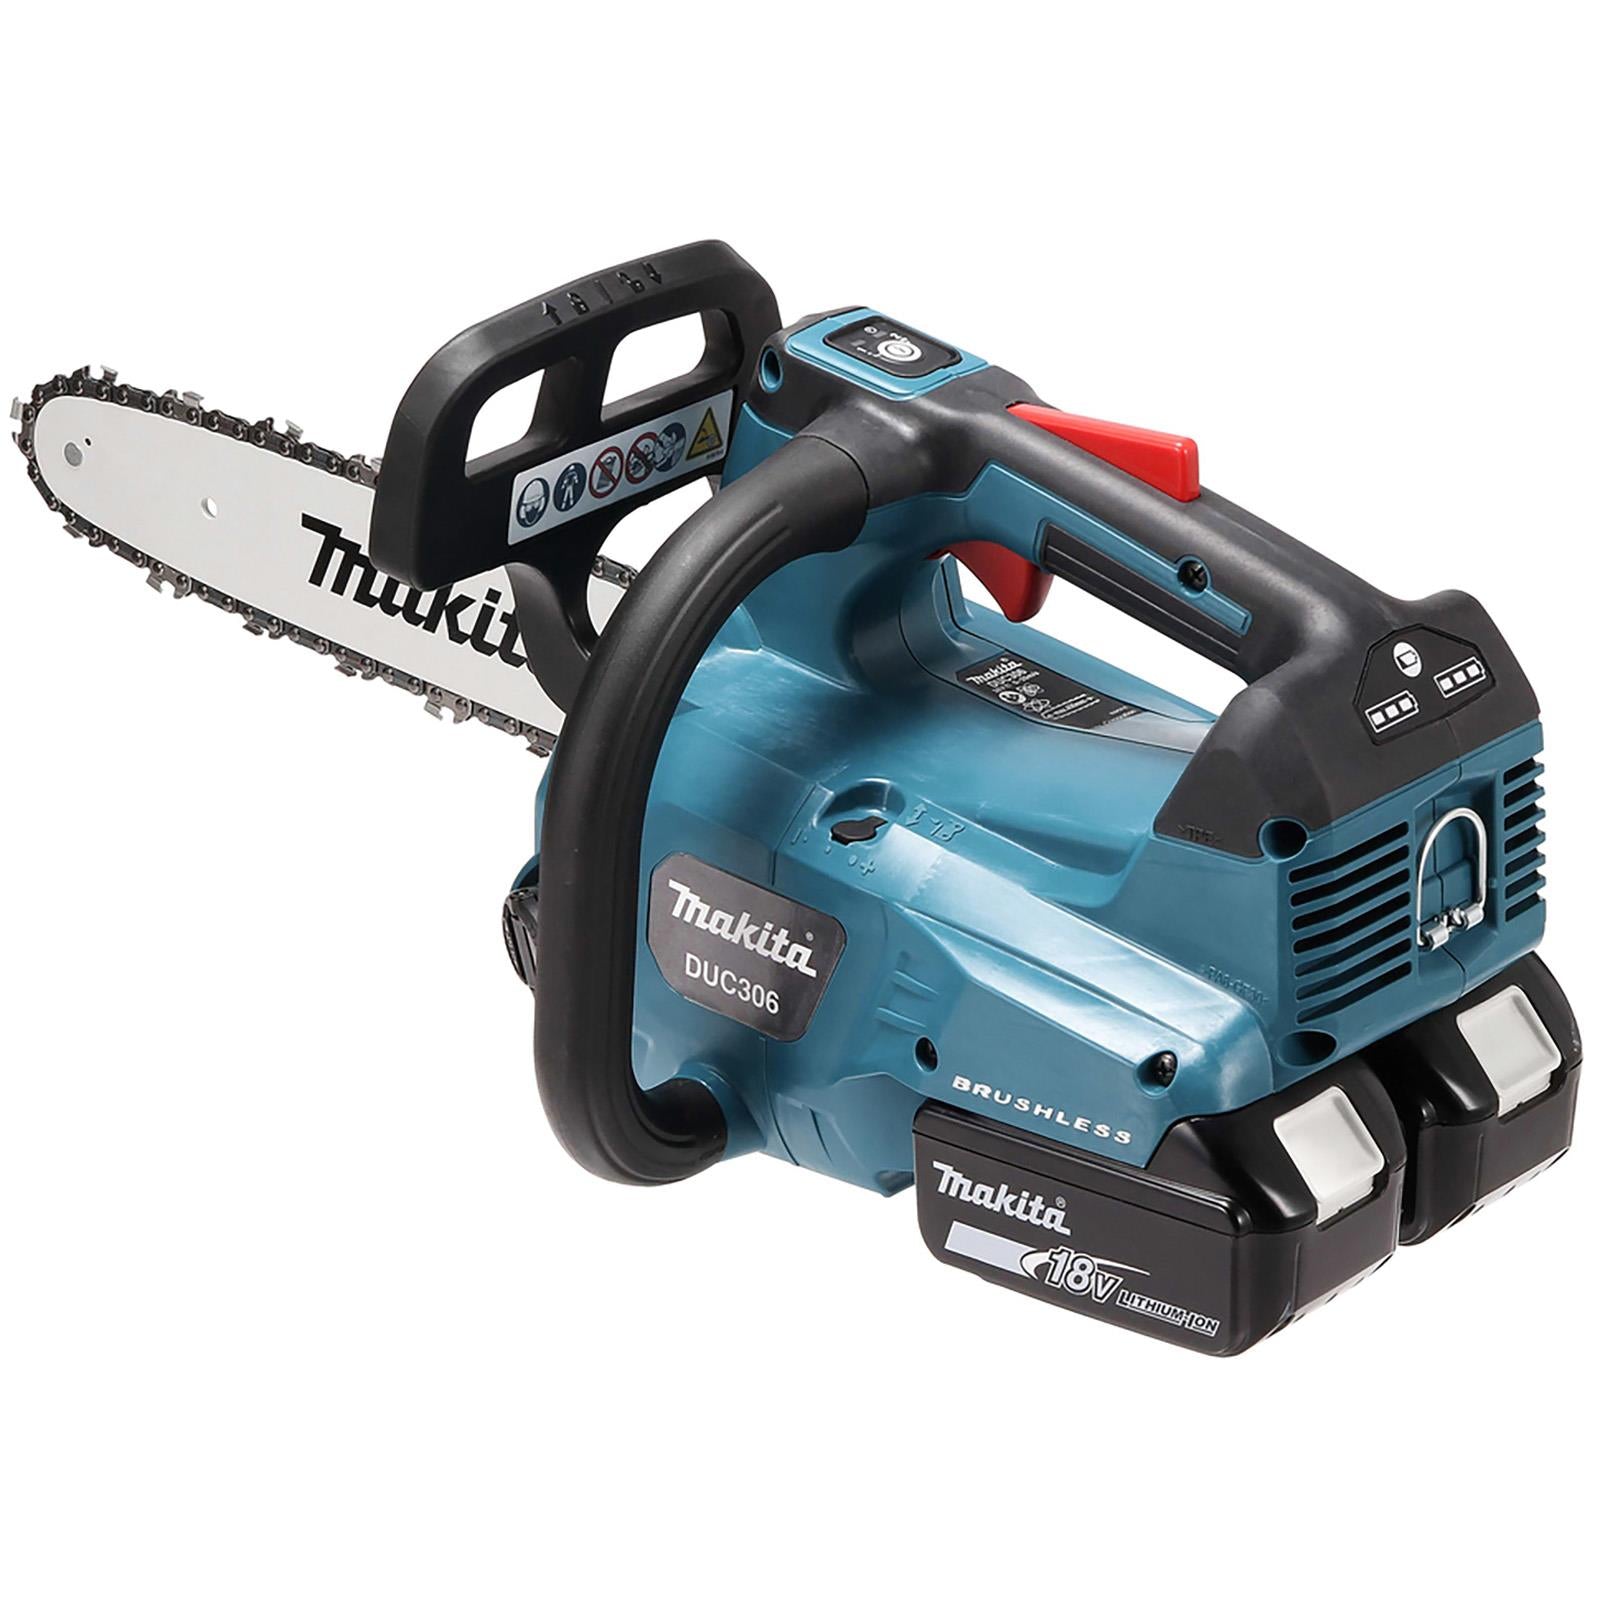 Makita Chainsaw Kit 30cm 12" 18V x 2 LXT Brushless Cordless 2 x 5Ah Battery and Dual Rapid Charger Top Handle Garden Tree Cutting Pruning DUC306PT2